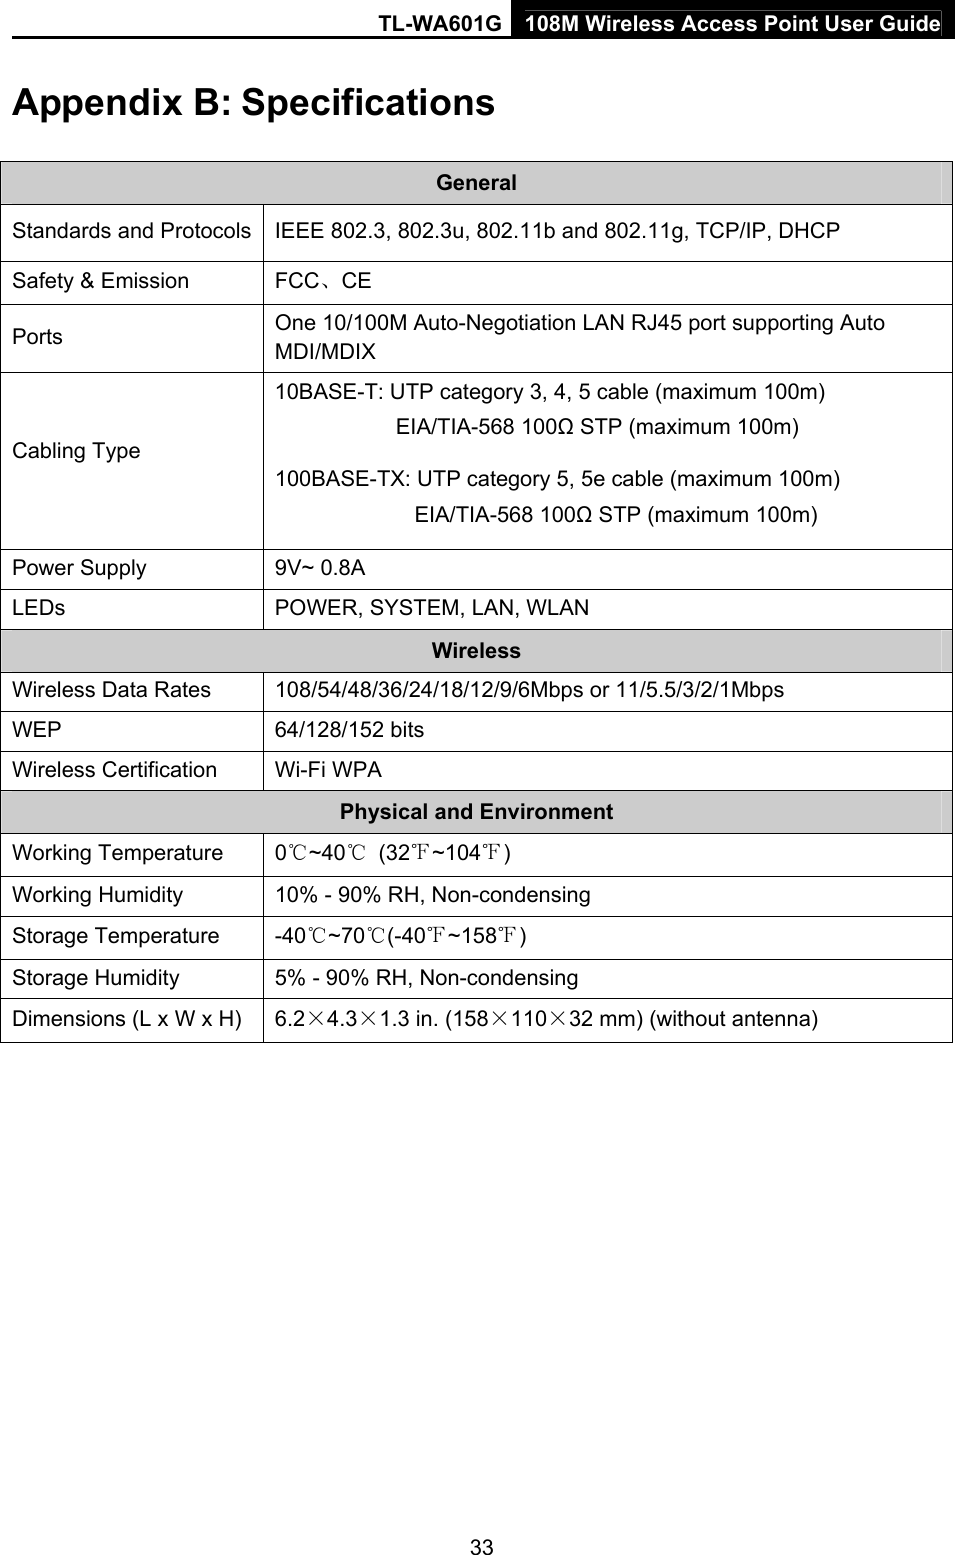 TL-WA601G 108M Wireless Access Point User Guide  33 Appendix B: Specifications General Standards and Protocols  IEEE 802.3, 802.3u, 802.11b and 802.11g, TCP/IP, DHCP Safety &amp; Emission  FCC、CE Ports  One 10/100M Auto-Negotiation LAN RJ45 port supporting Auto MDI/MDIX Cabling Type 10BASE-T: UTP category 3, 4, 5 cable (maximum 100m) EIA/TIA-568 100Ω STP (maximum 100m) 100BASE-TX: UTP category 5, 5e cable (maximum 100m) EIA/TIA-568 100Ω STP (maximum 100m) Power Supply  9V~ 0.8A LEDs  POWER, SYSTEM, LAN, WLAN Wireless Wireless Data Rates  108/54/48/36/24/18/12/9/6Mbps or 11/5.5/3/2/1Mbps WEP 64/128/152 bits Wireless Certification  Wi-Fi WPA Physical and Environment Working Temperature 0℃~40℃ (32℉~104℉) Working Humidity  10% - 90% RH, Non-condensing Storage Temperature  -40℃~70℃(-40℉~158℉) Storage Humidity  5% - 90% RH, Non-condensing Dimensions (L x W x H)  6.2×4.3×1.3 in. (158×110×32 mm) (without antenna)  